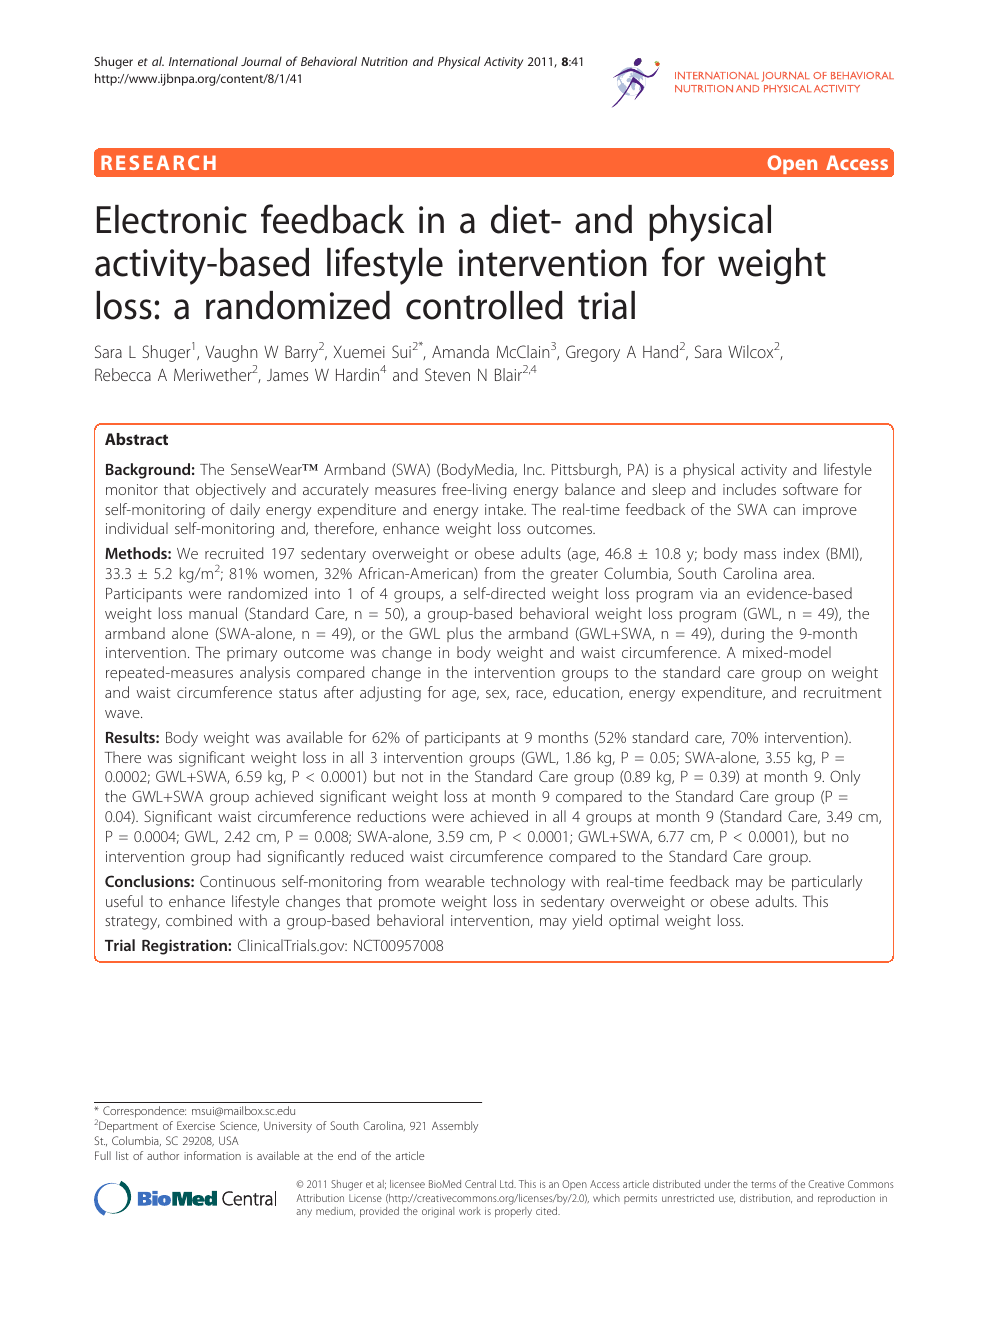 absorptie Op het randje grip Electronic feedback in a diet- and physical activity-based lifestyle  intervention for weight loss: a randomized controlled trial – topic of  research paper in Health sciences. Download scholarly article PDF and read  for